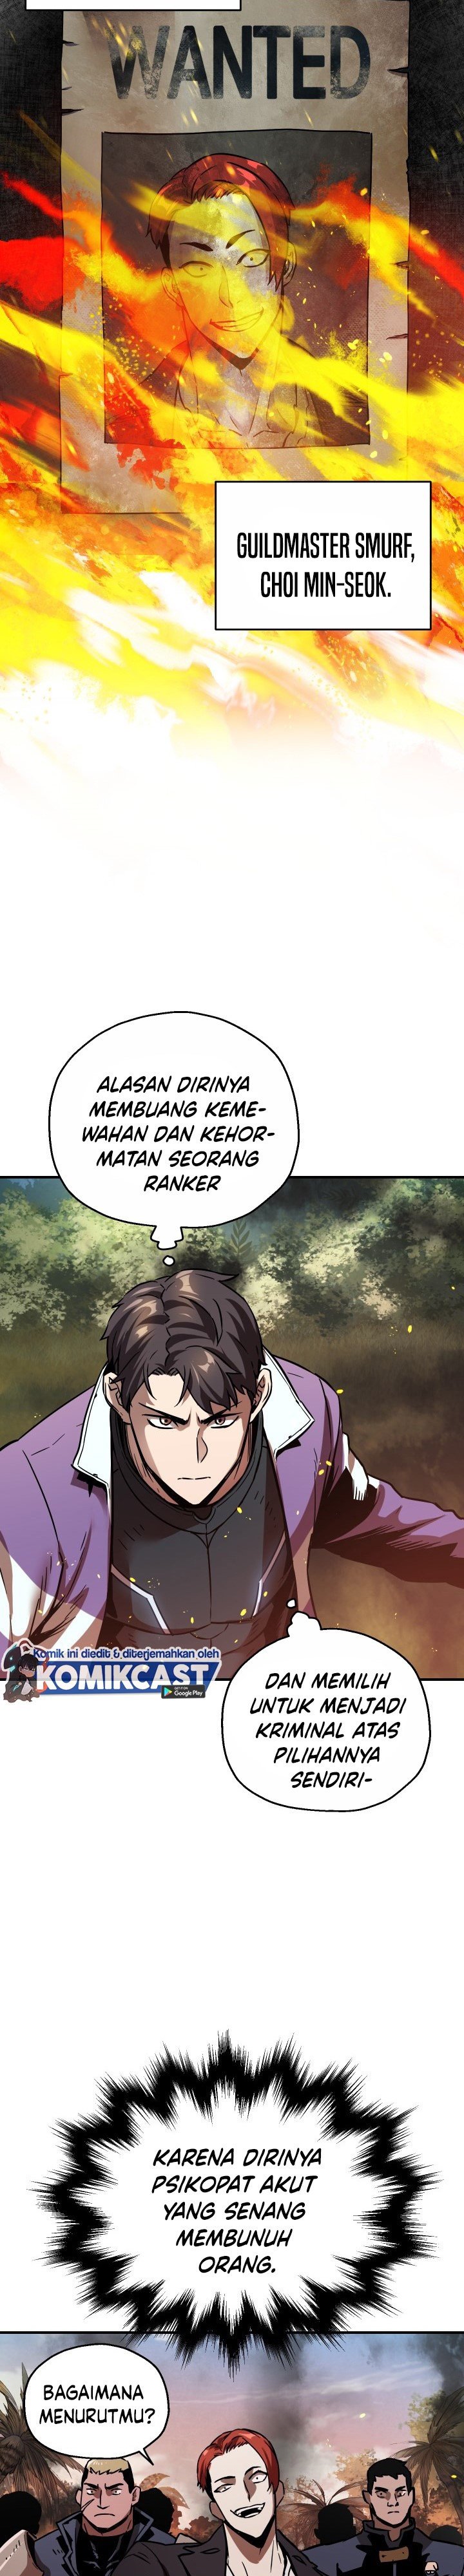 Baca Player Who Can’t Level Up Chapter 34  - GudangKomik